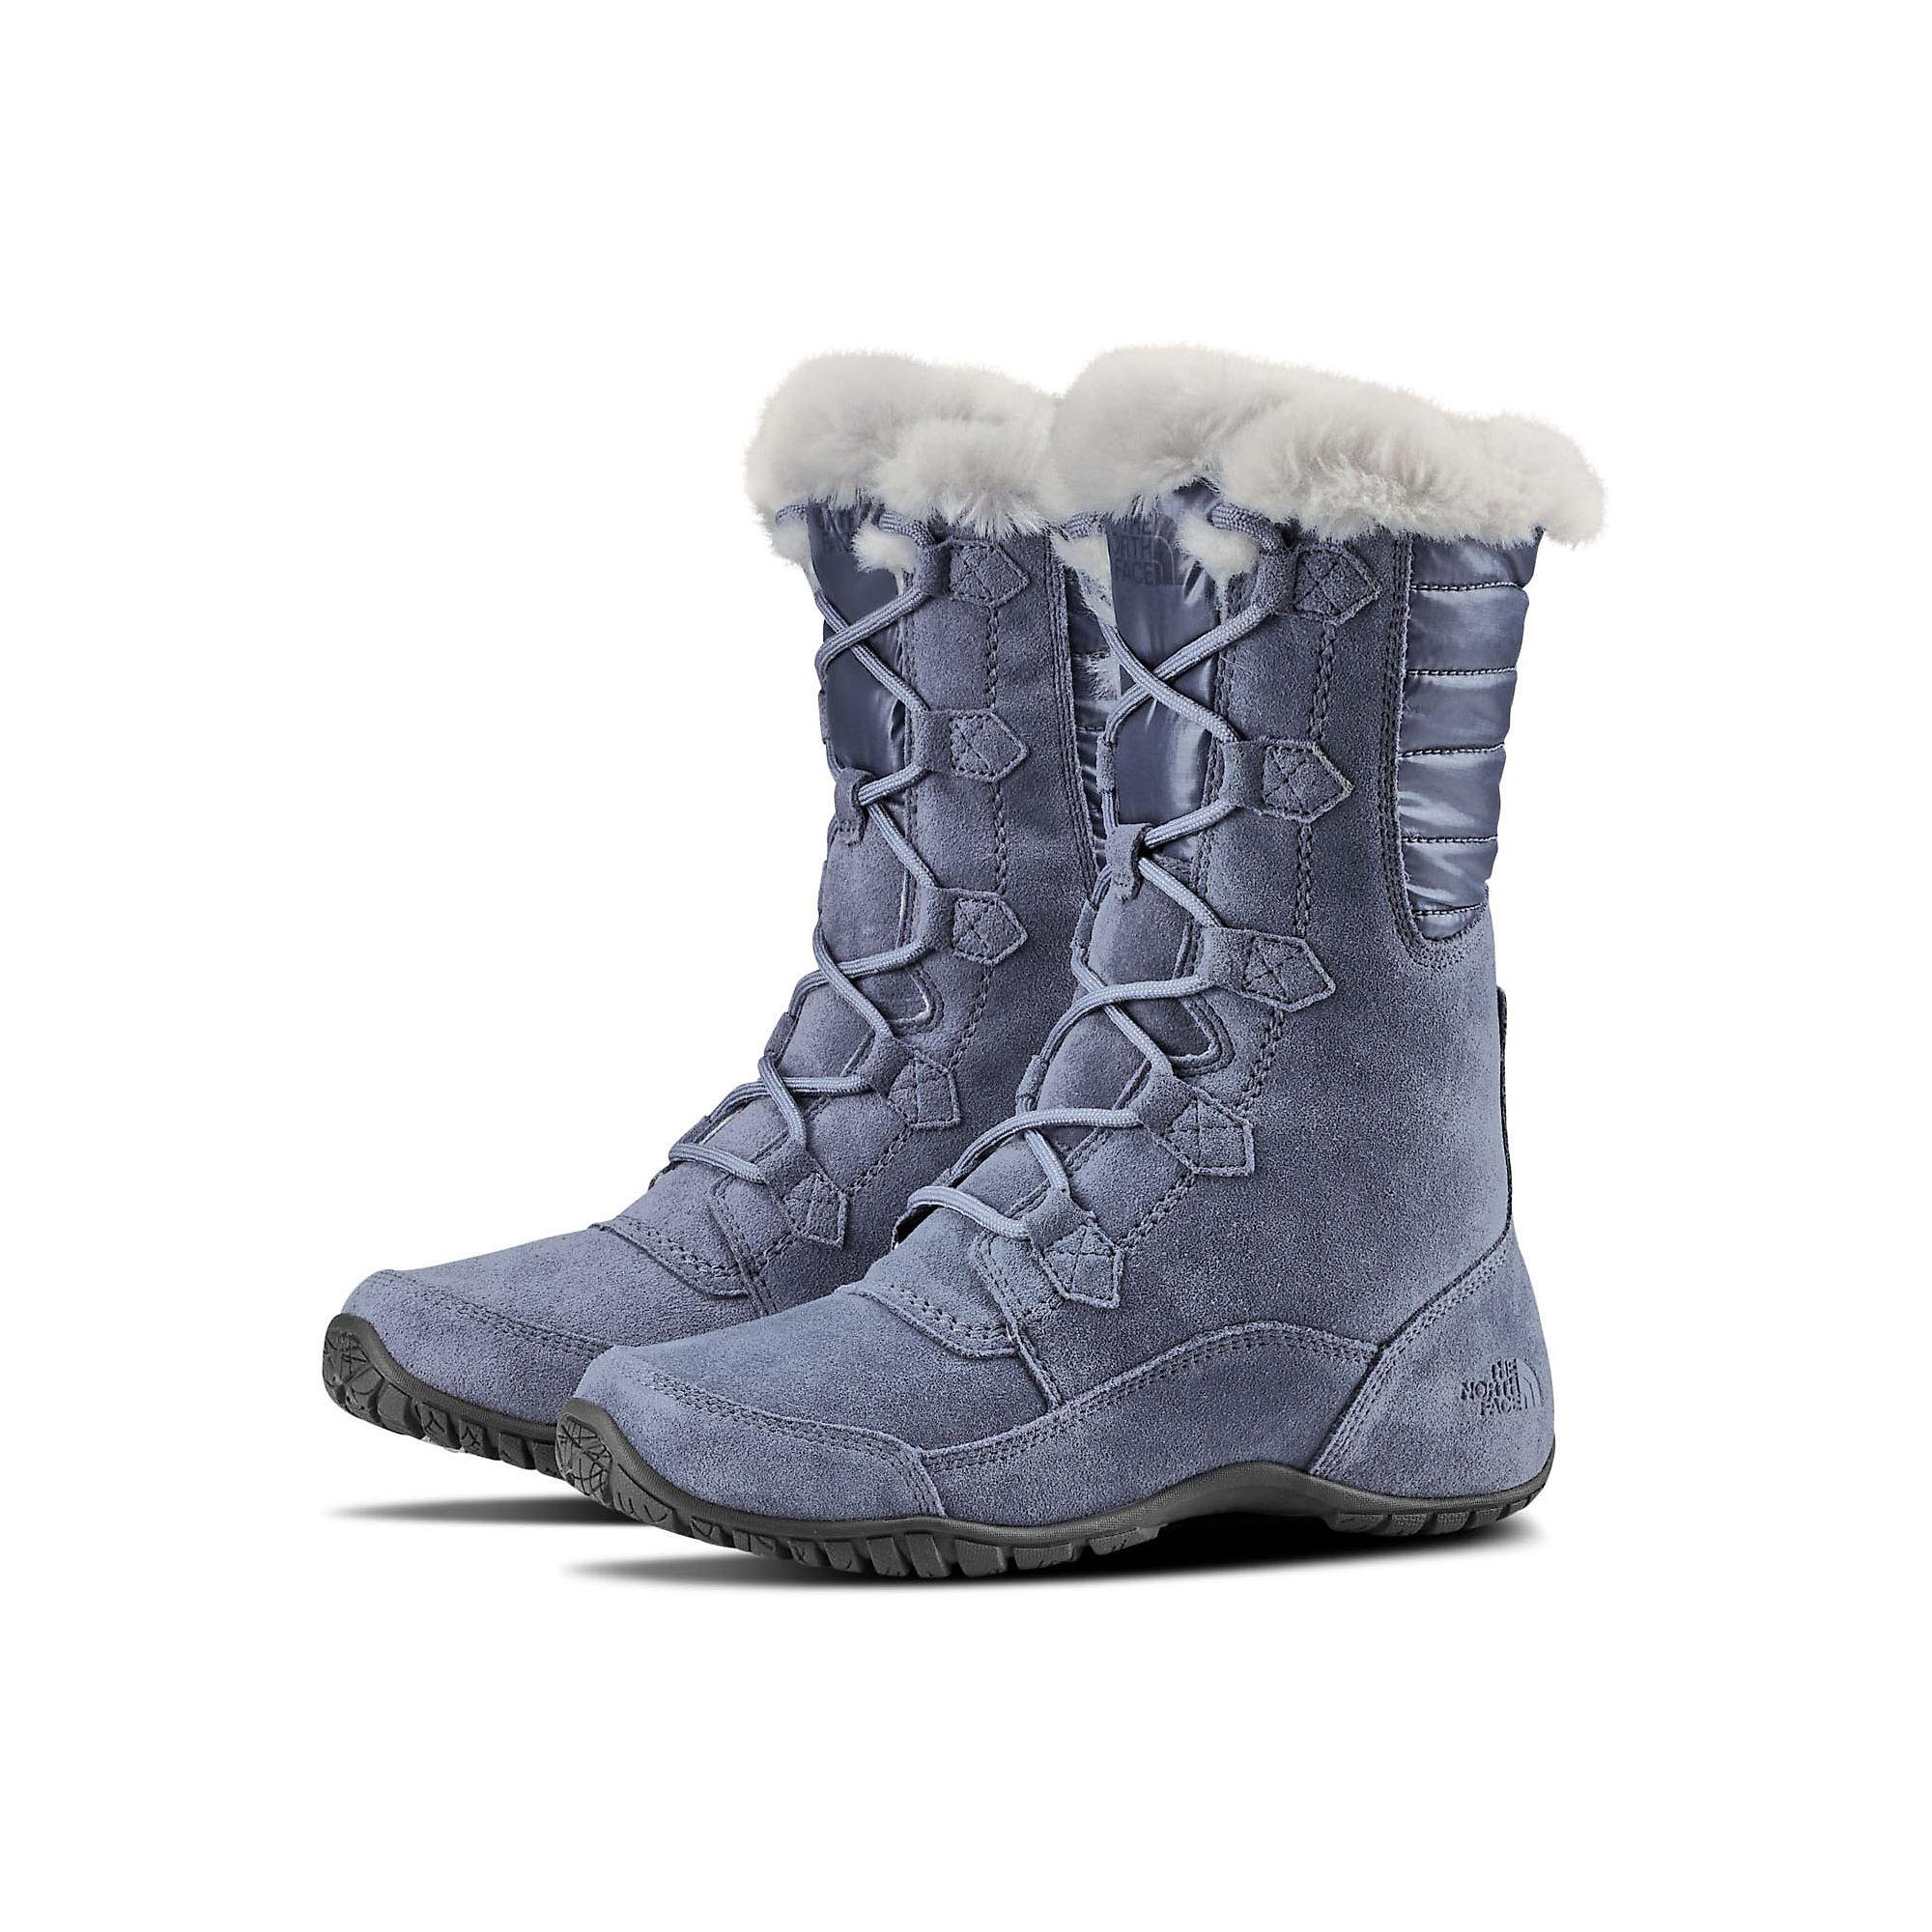 north face purna boots